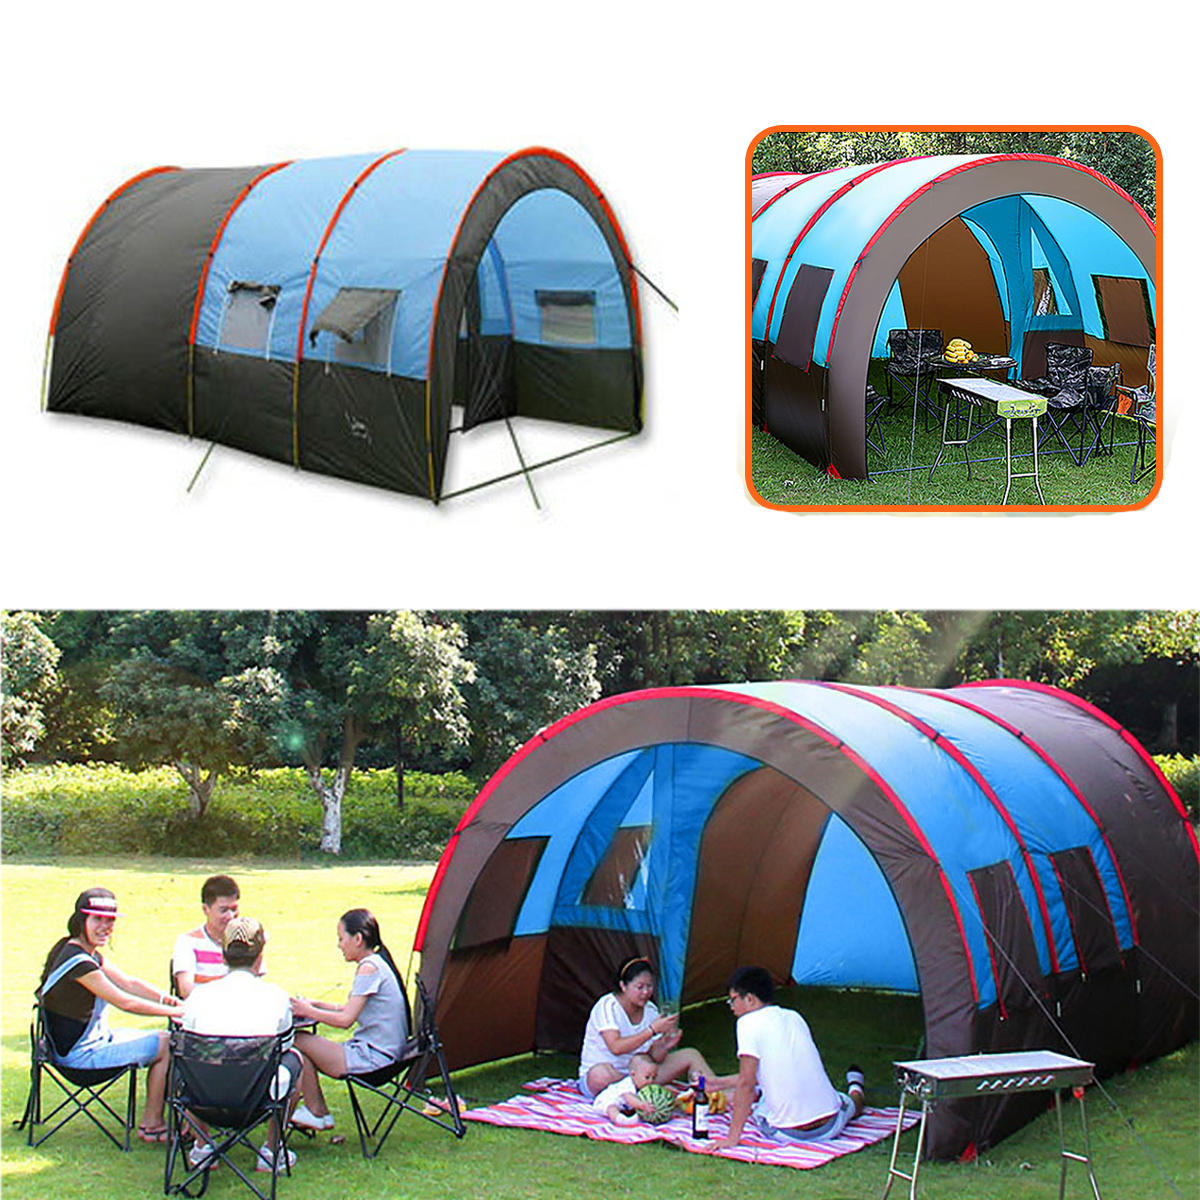 Outdoor Camping Tent 8-10 People Waterproof Double Layer Large Family Tent Canopy Sunshade